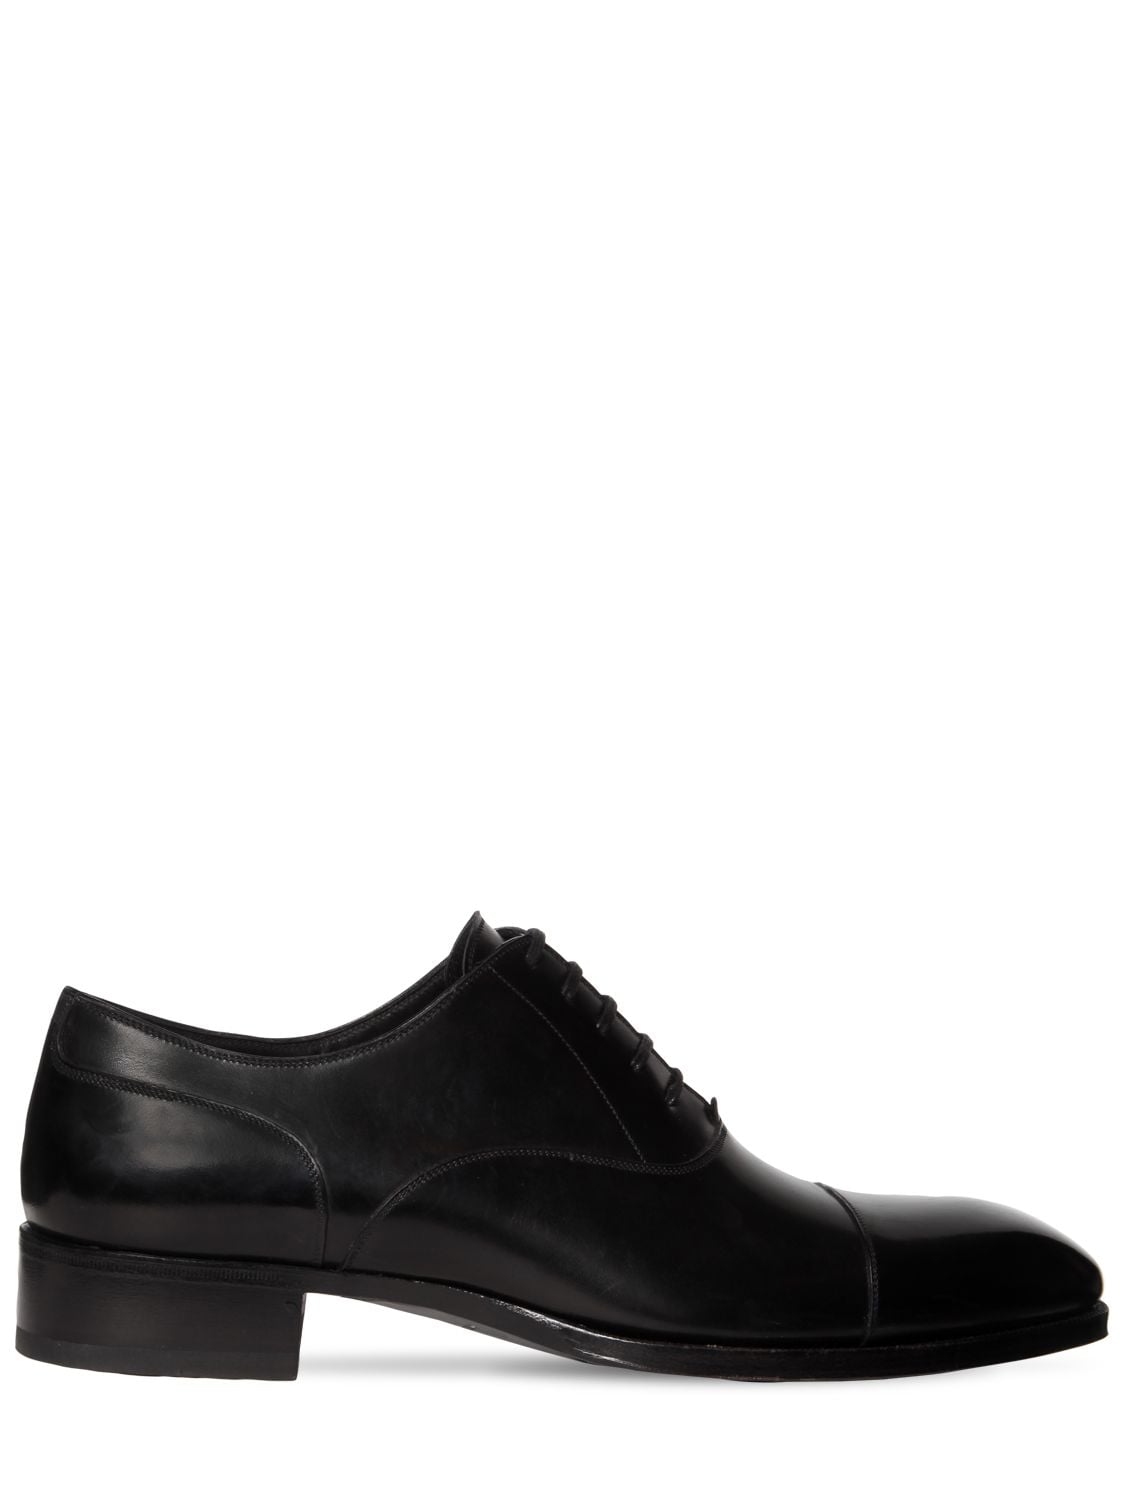 TOM FORD 27MM ELKAN SMOOTH LEATHER LACE-UP SHOES,73IY1E005-VTKWMDA1